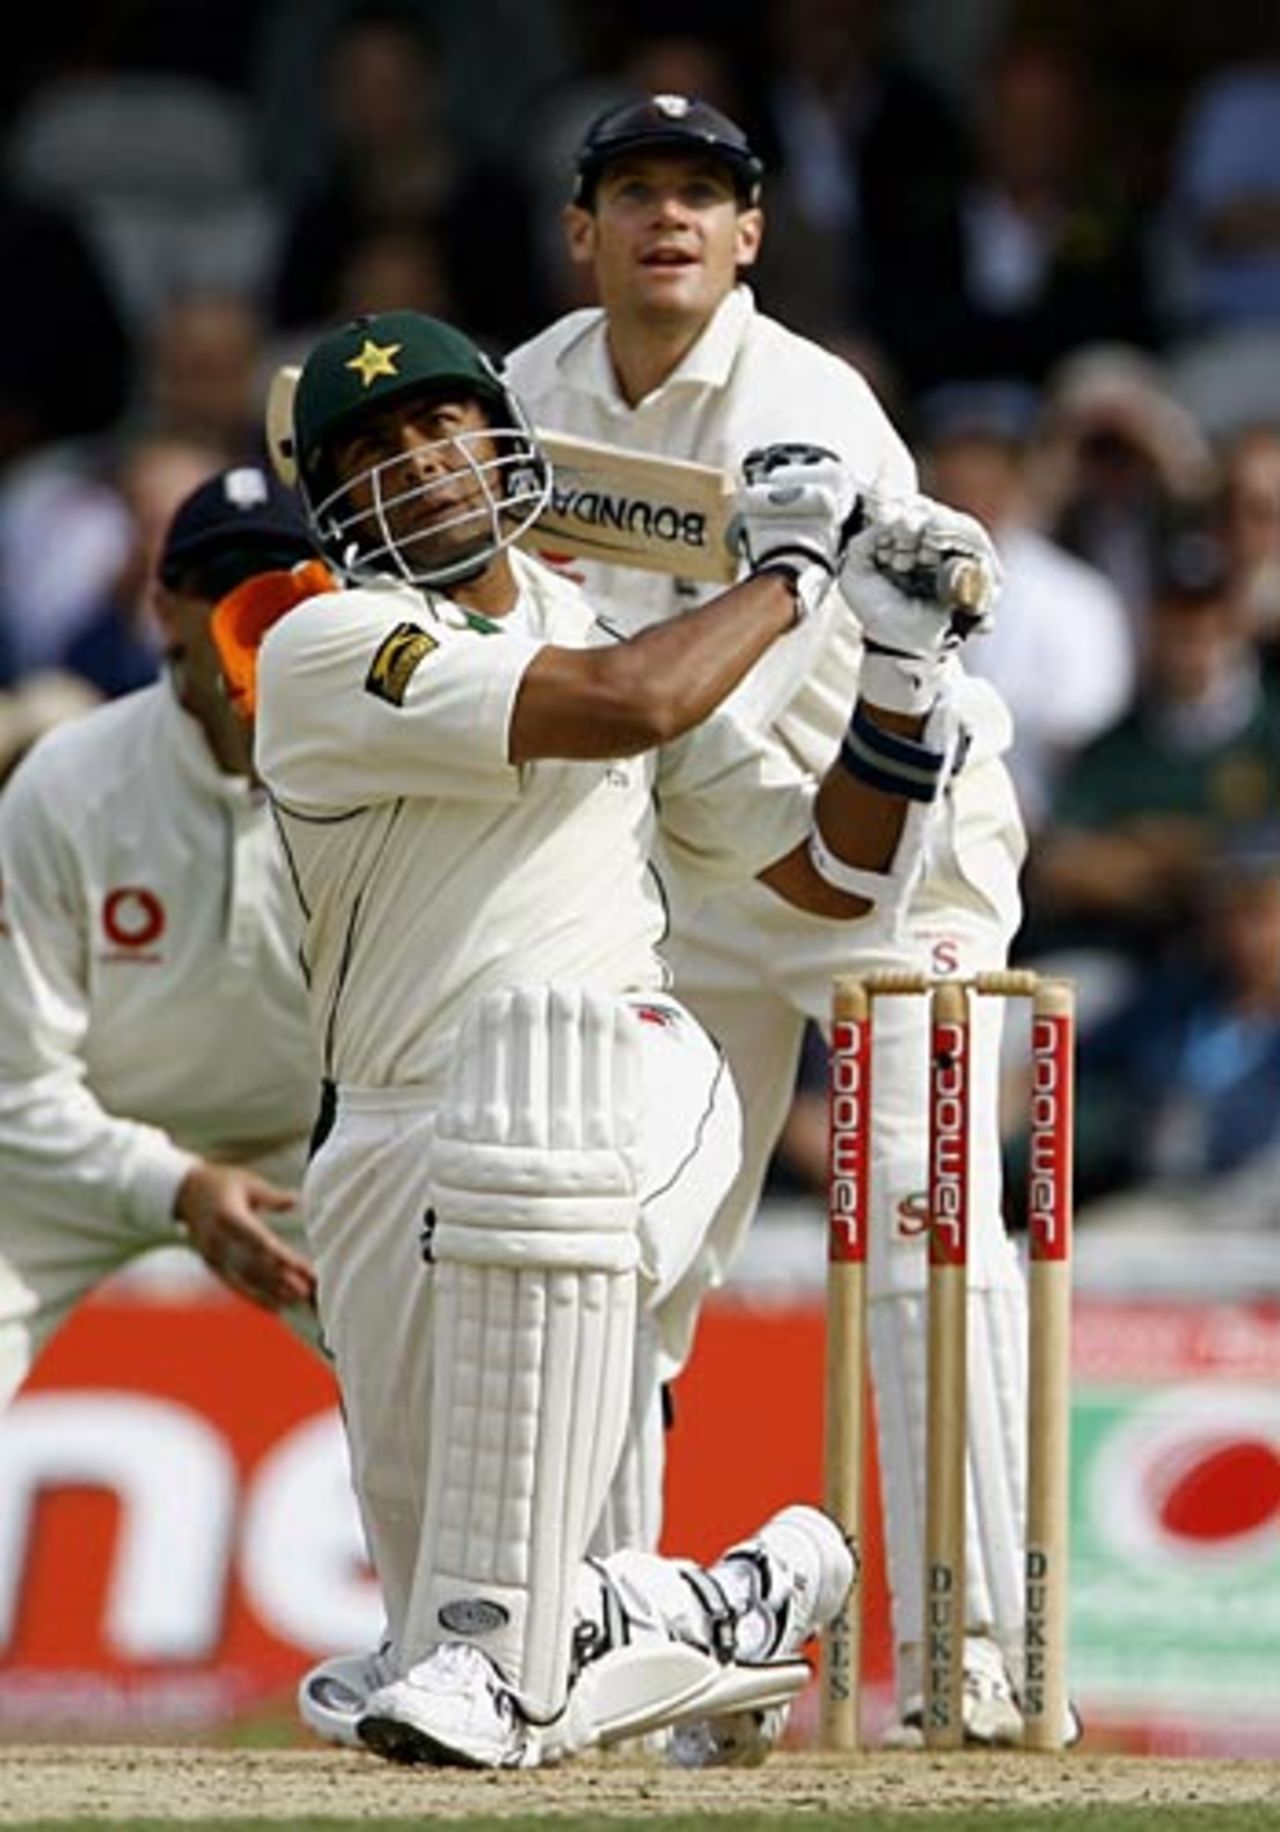 Shahid Nazir launches Monty Panesar over long on, England v Pakistan, 4th Test, The Oval, August 19, 2006